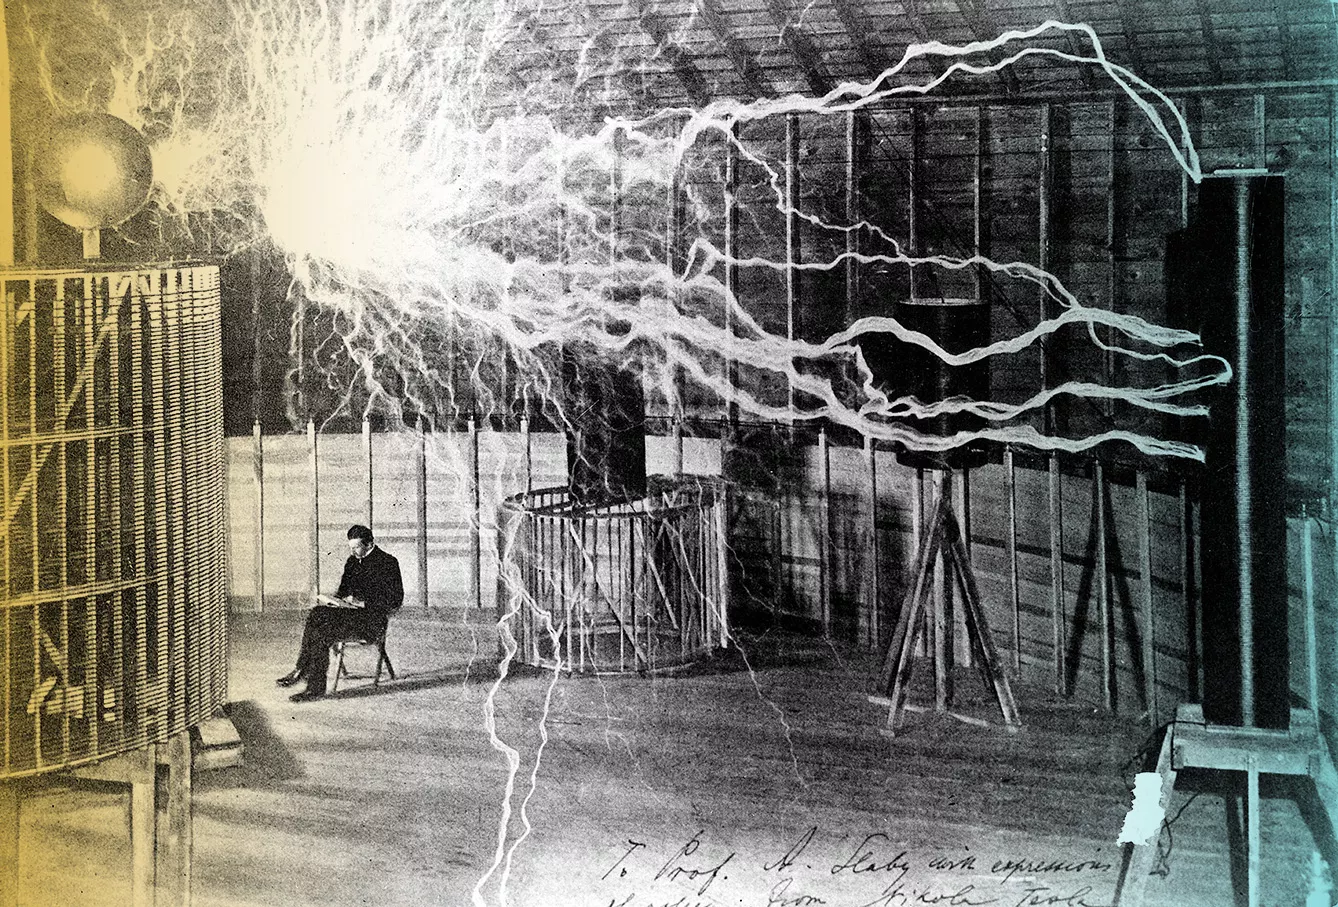 Tesla studying electricity in the laboratory